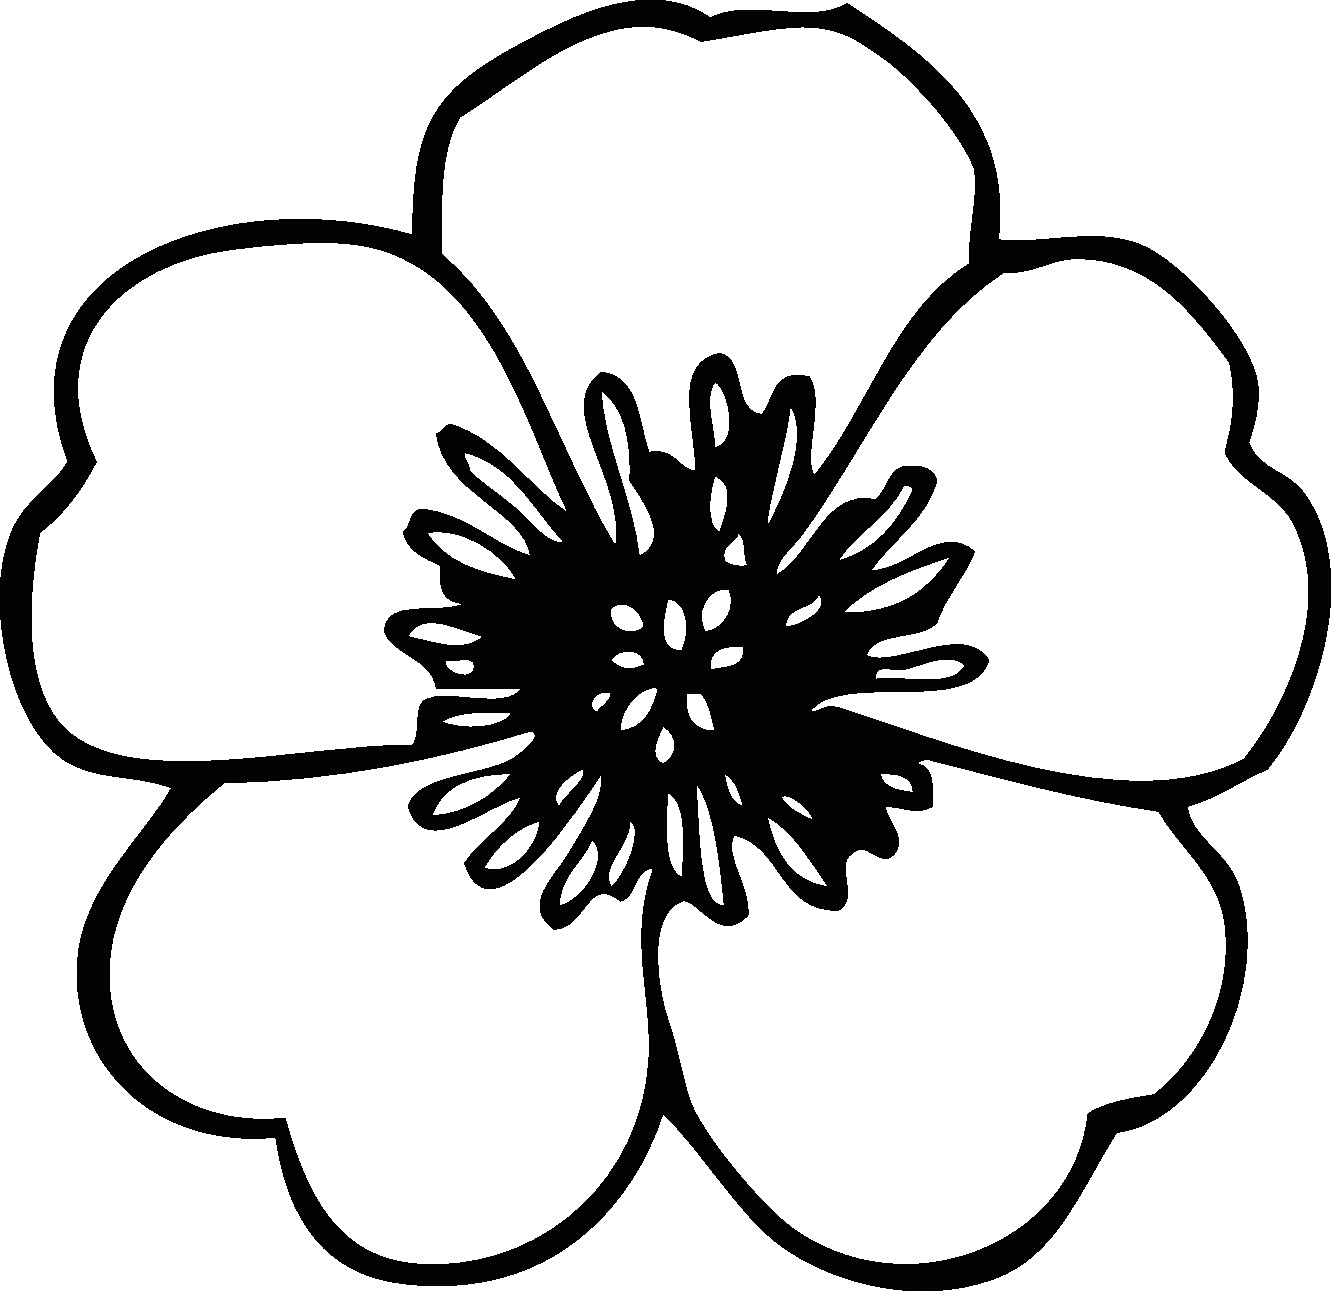 Flowers Drawing Graphic Flower Black White Line Clipart Panda Free Clipart Images